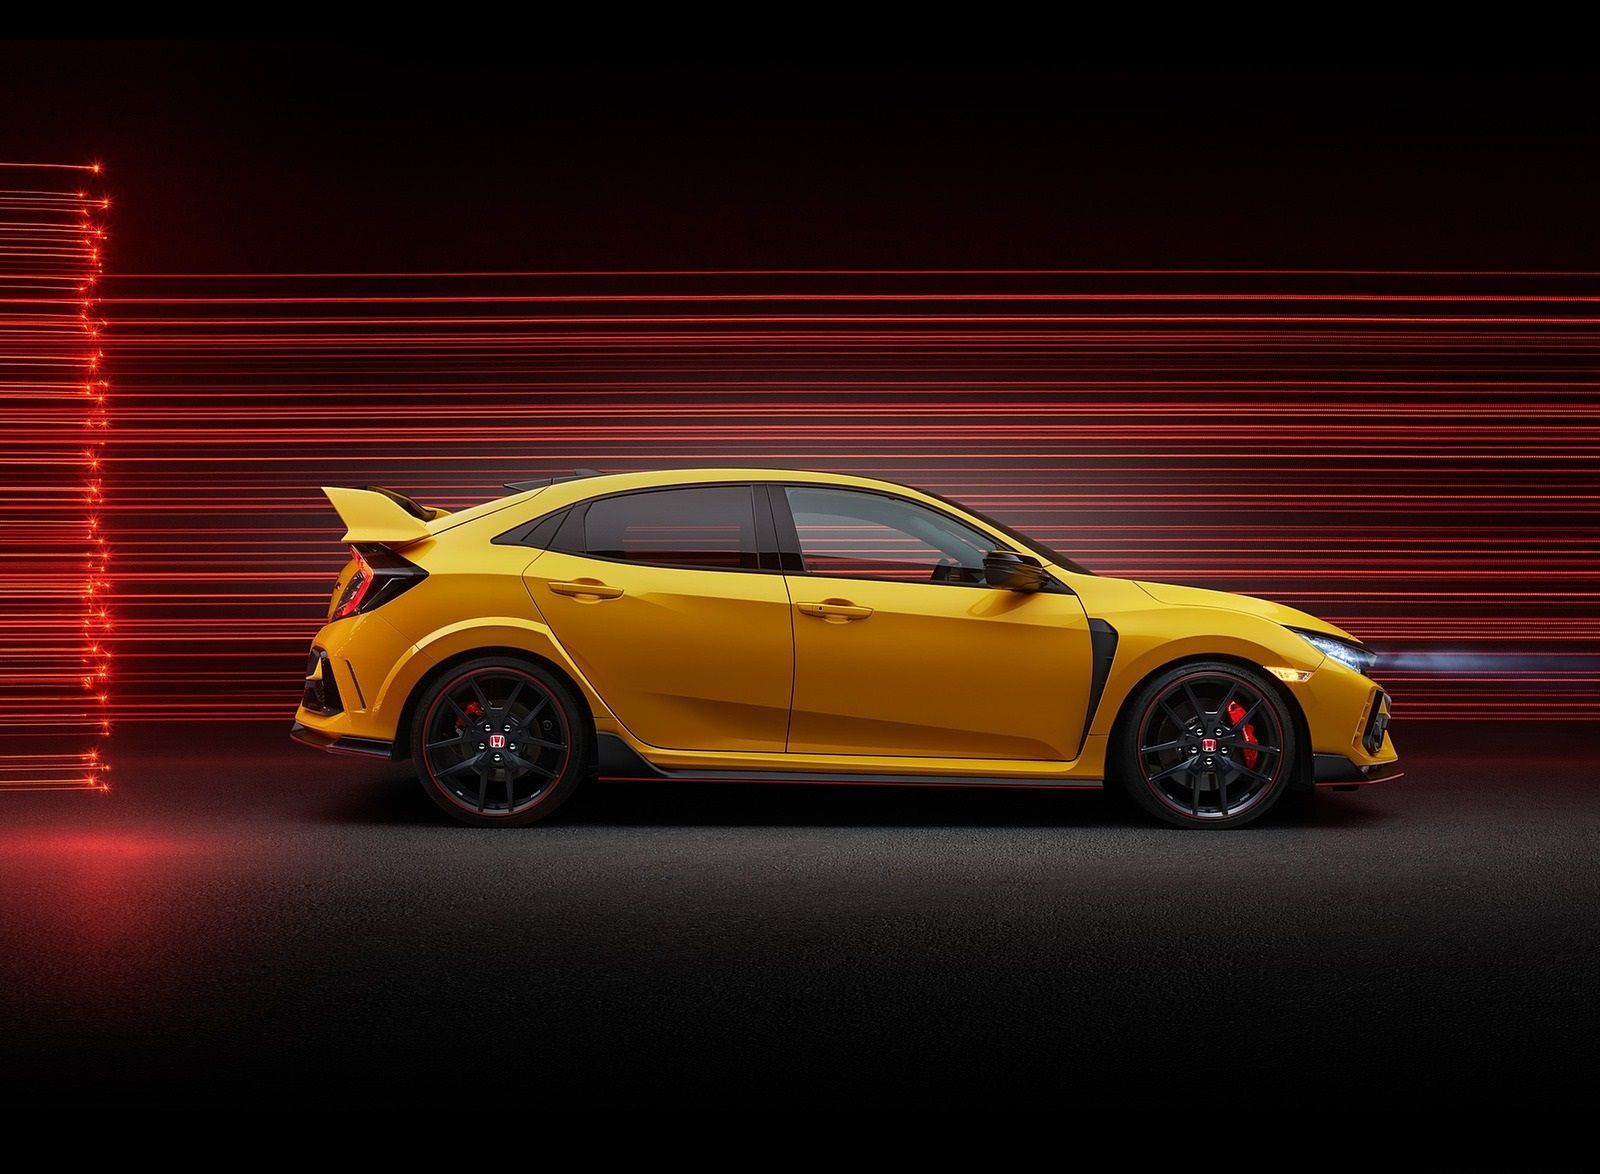 Honda Civic Type R Limited Edition Side Wallpaper (6)